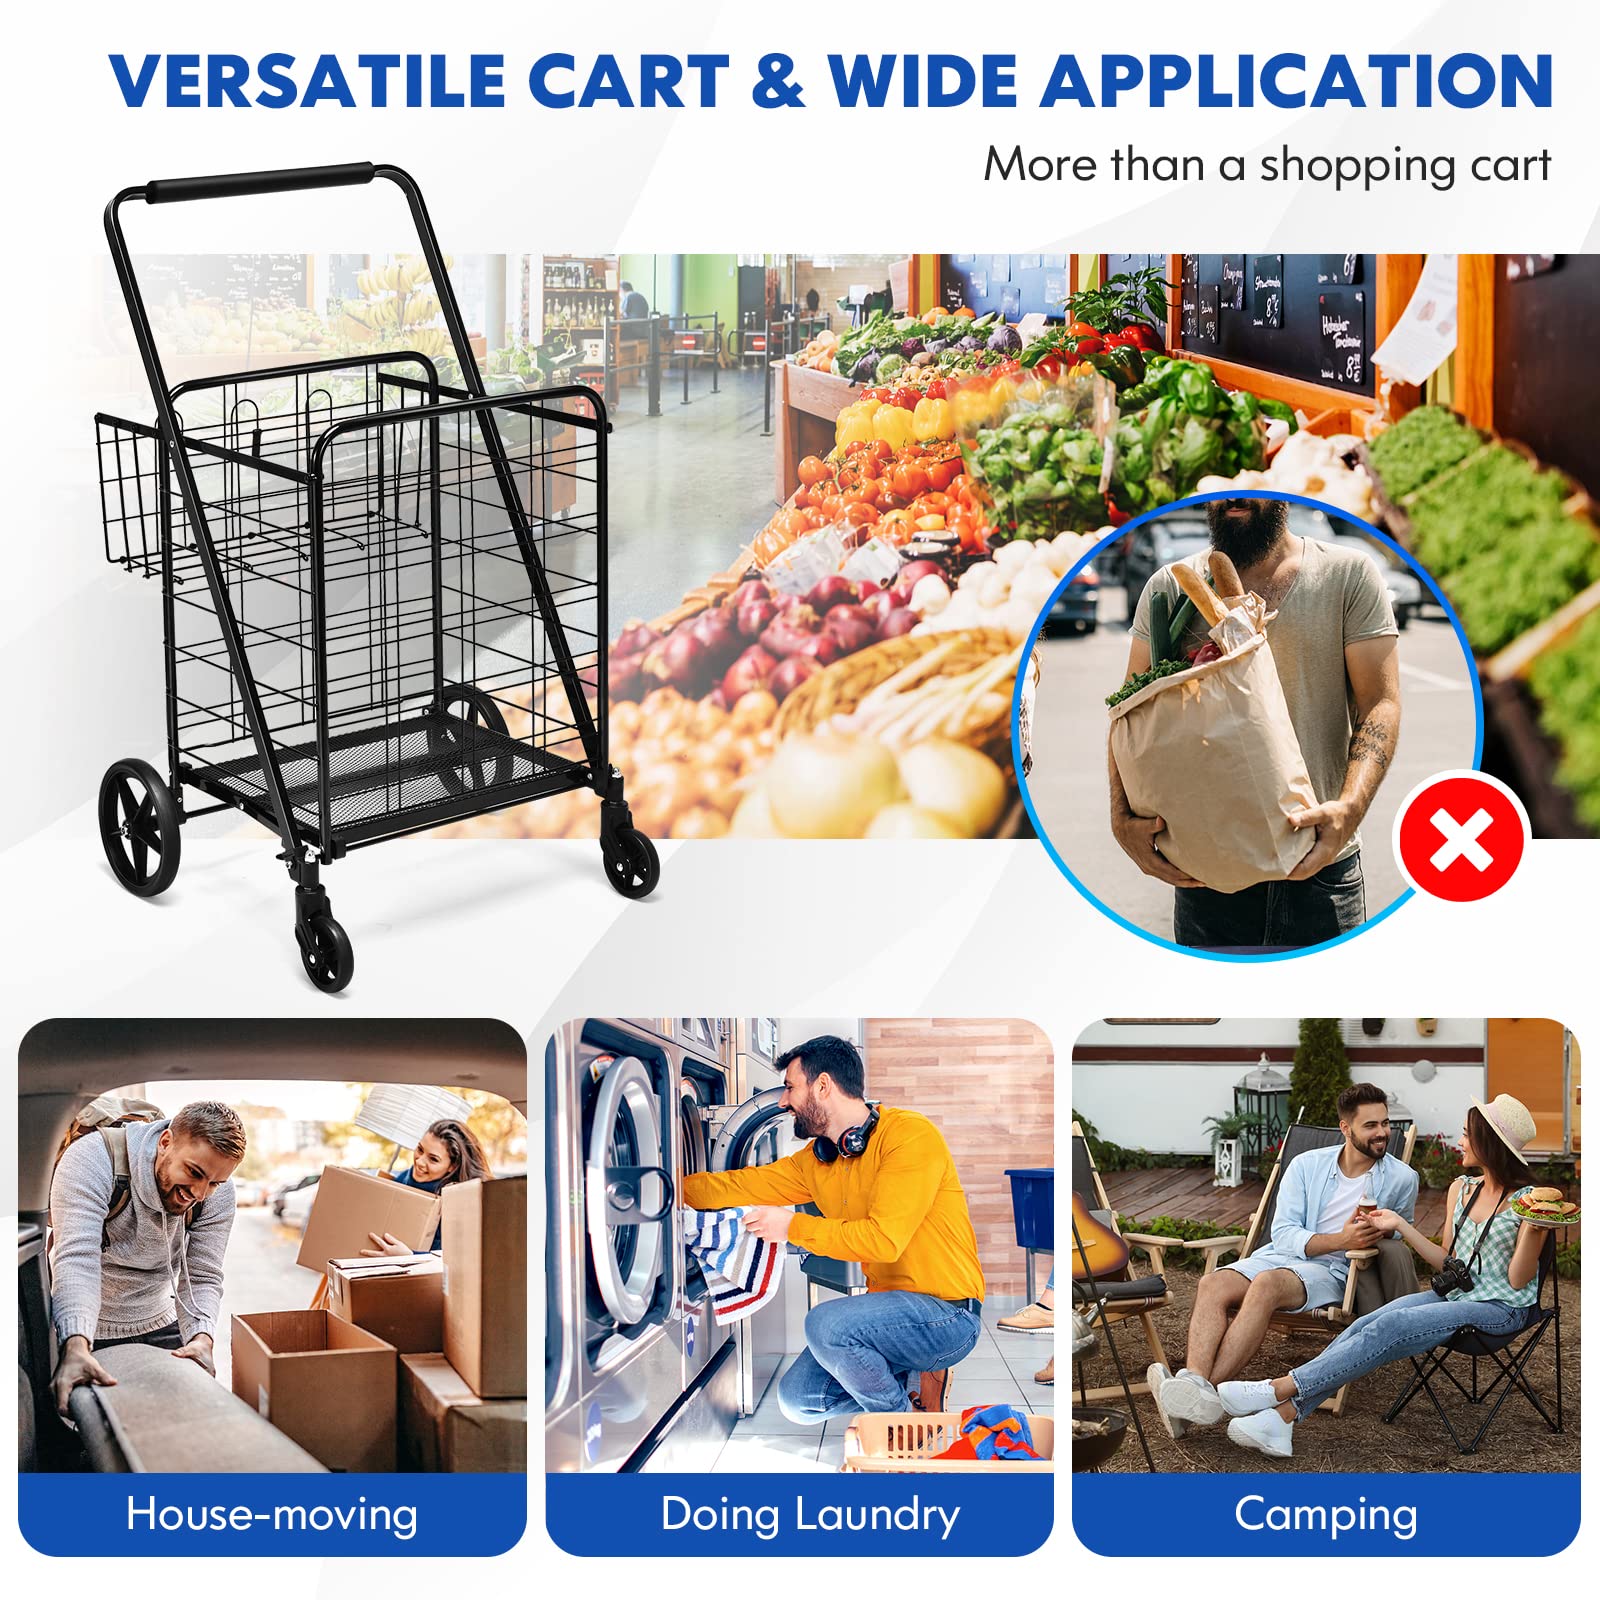 COSTWAY Folding Shopping Cart, Extra Jumbo Double Basket Grocery Cart with 360° Swivel Rolling Bearing Wheels, Dense Metal Mesh Base, Large Capacity Utility Cart for Market, Grocery, Laundry (Black)